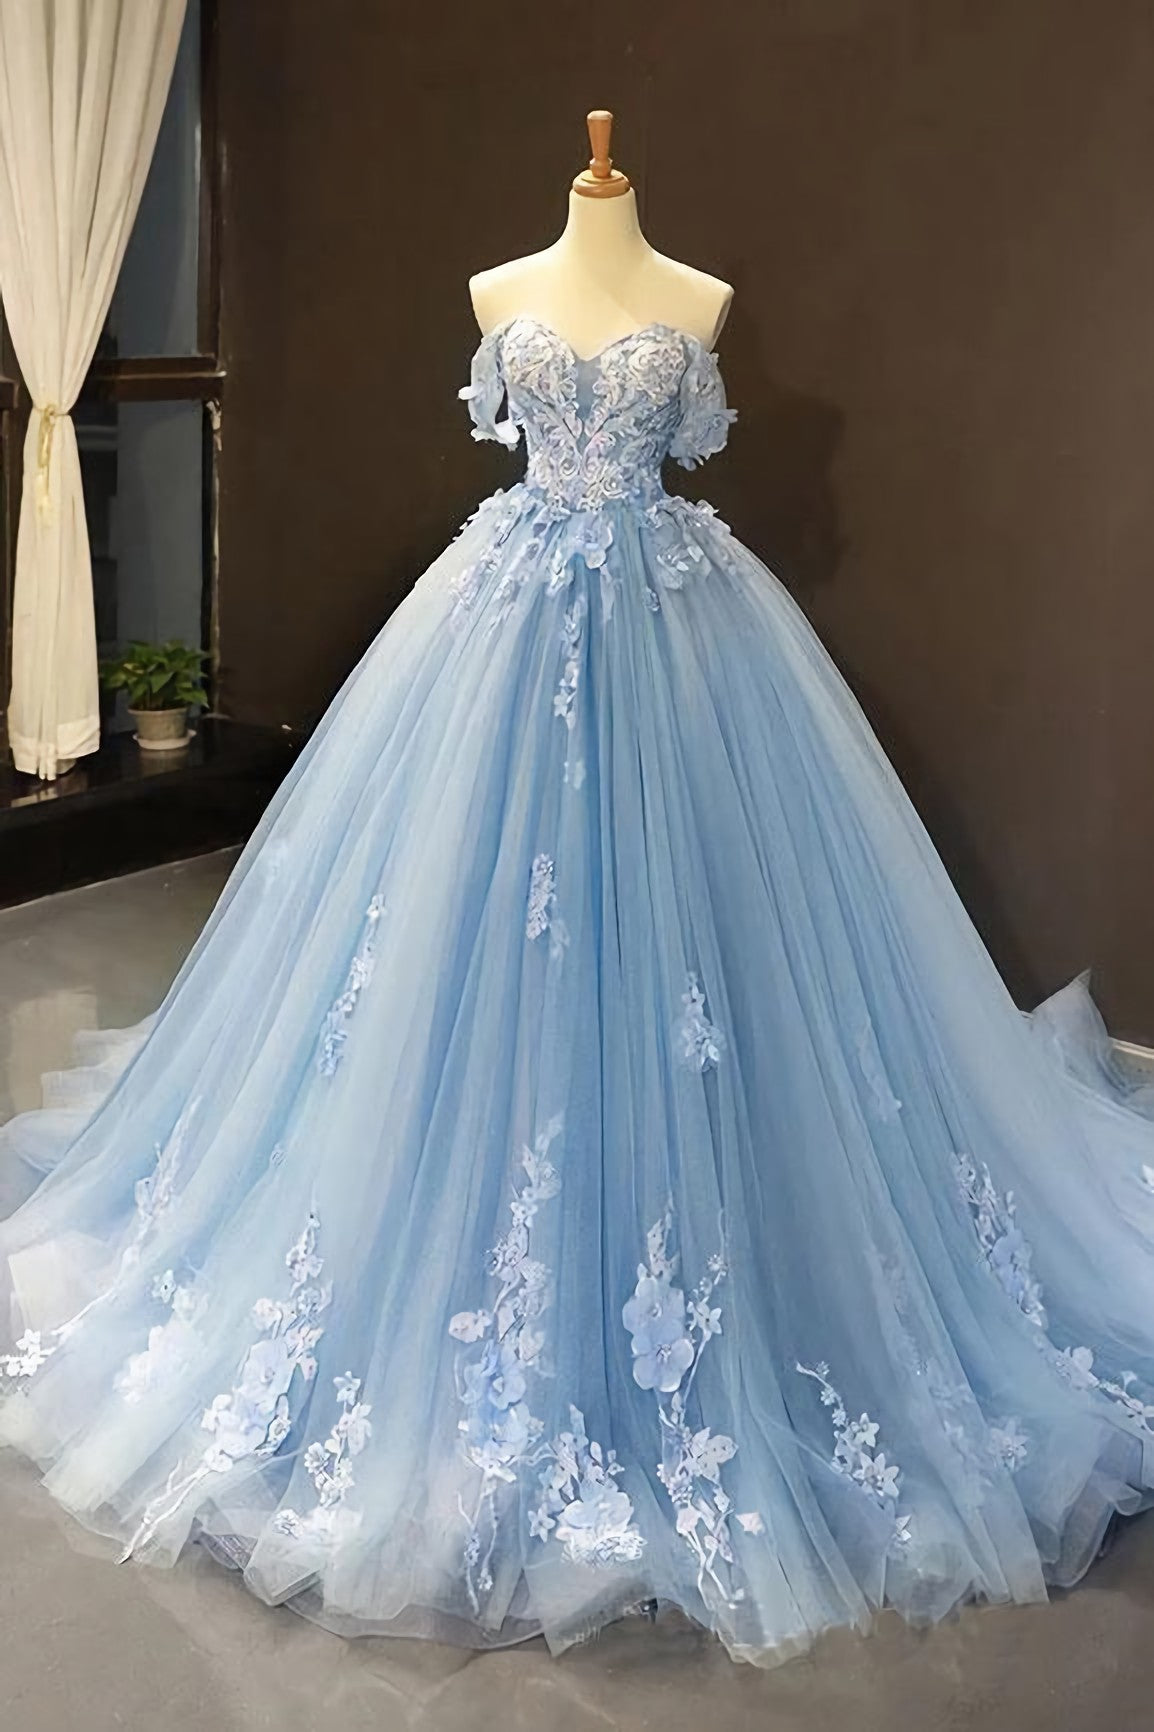 Party Dress Baby, Light Sky Blue Off The Shoulder Ball Gown Tulle Prom Dress With Applique